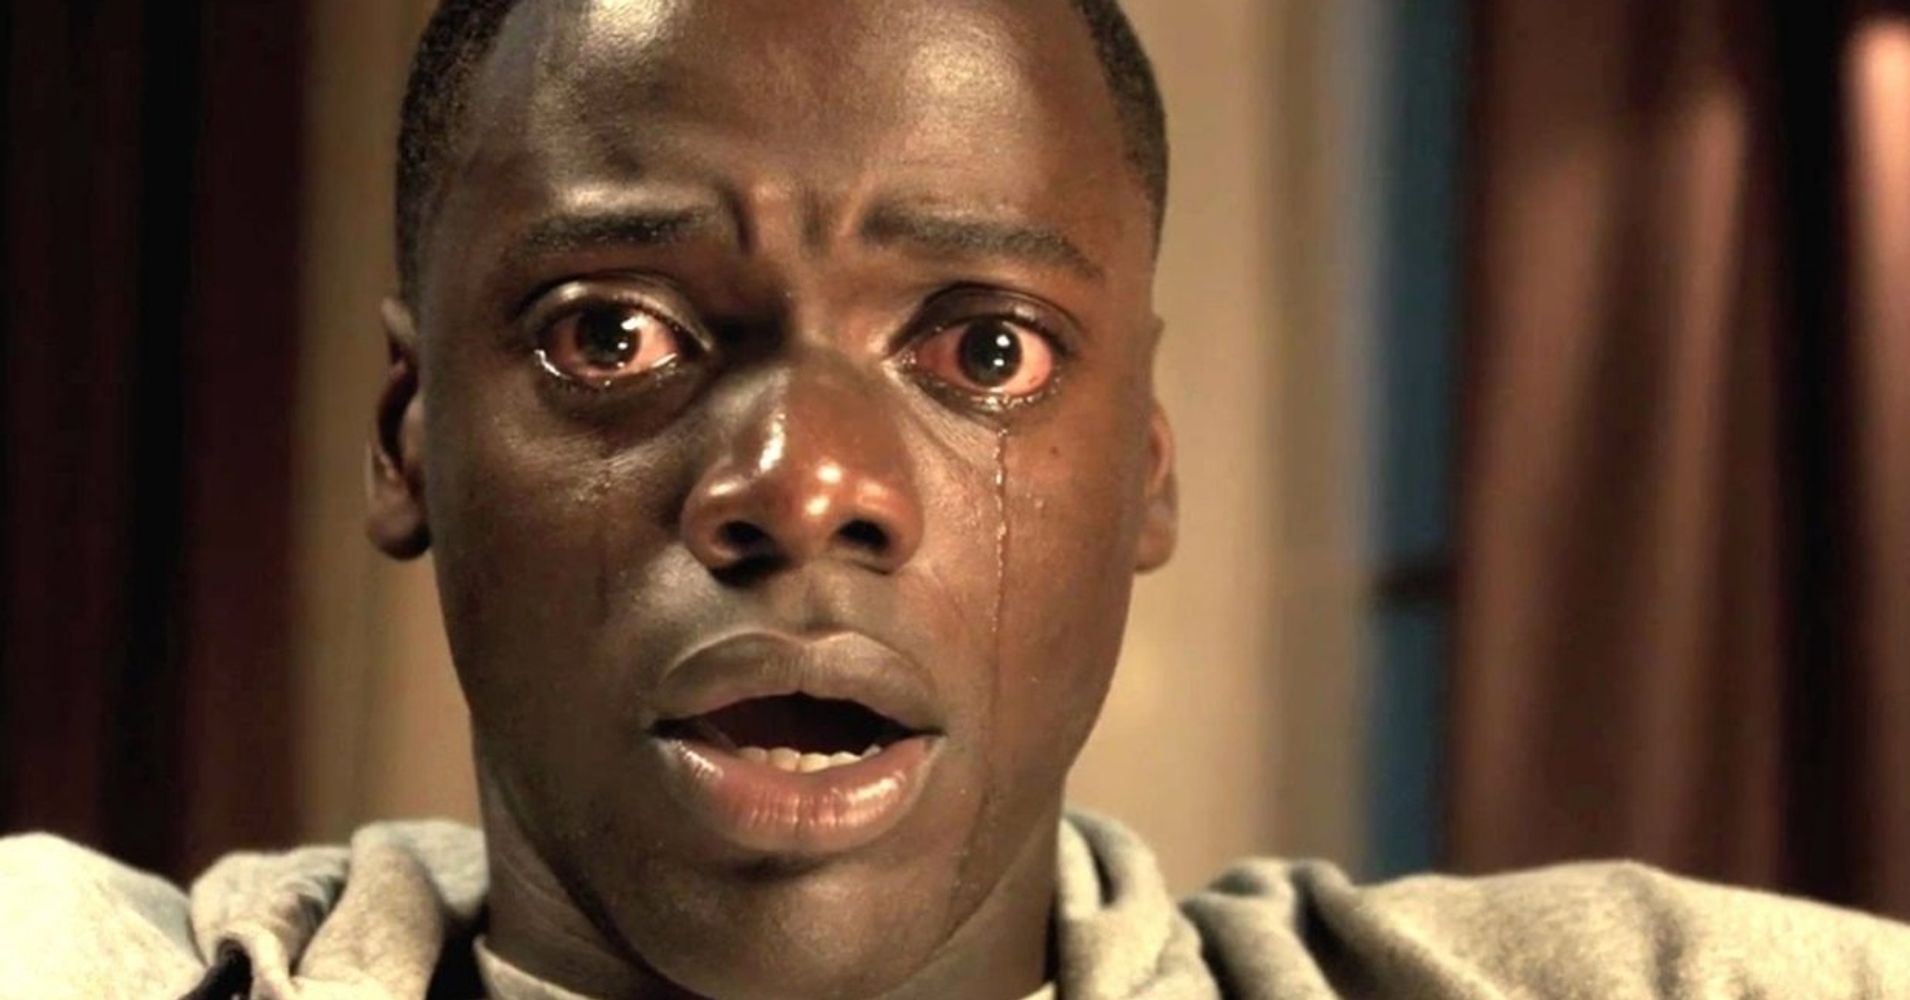 This Deleted Moment From 'Get Out' Would Have Changed The Whole Movie